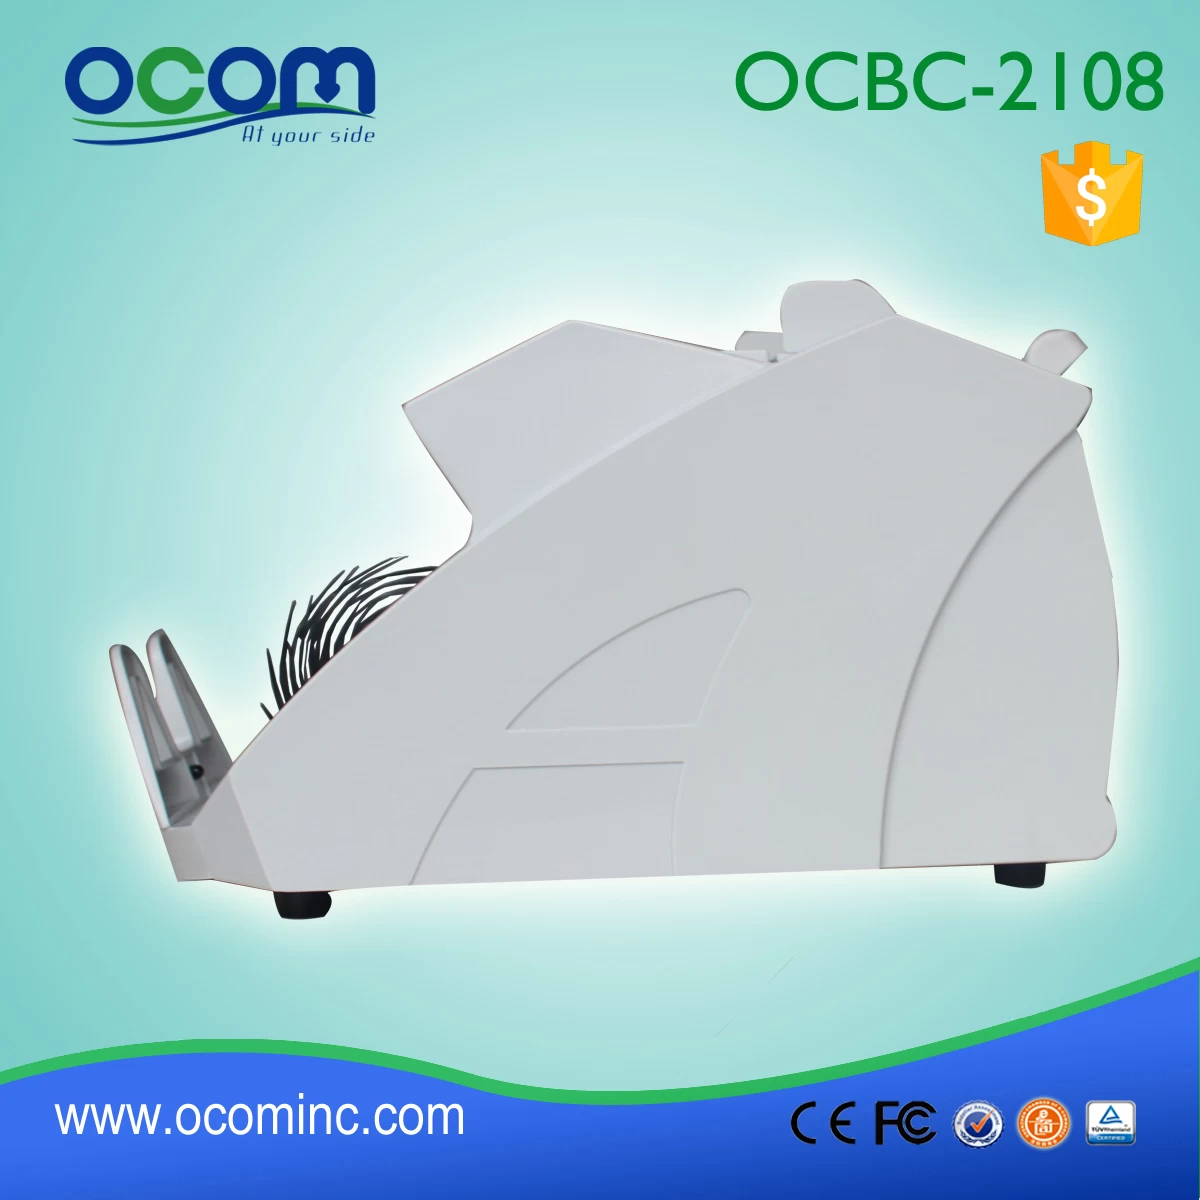 OCBC-2108 Professional Money Bill Currency Counting Machine Counter